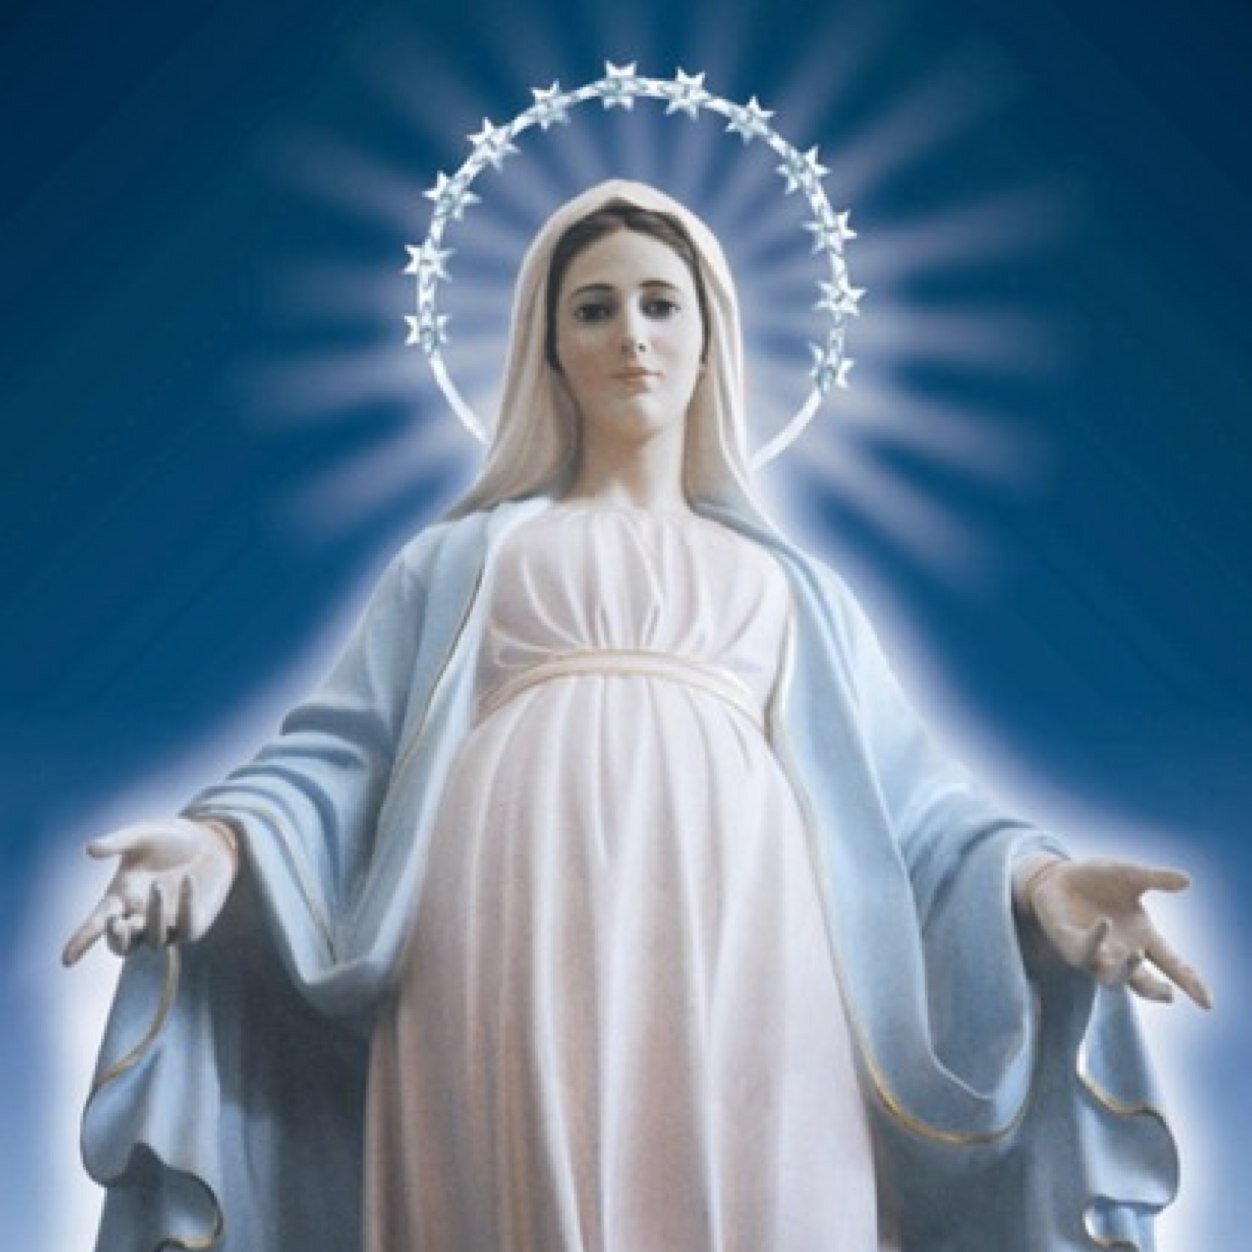 Facts about the blessed virgin mary